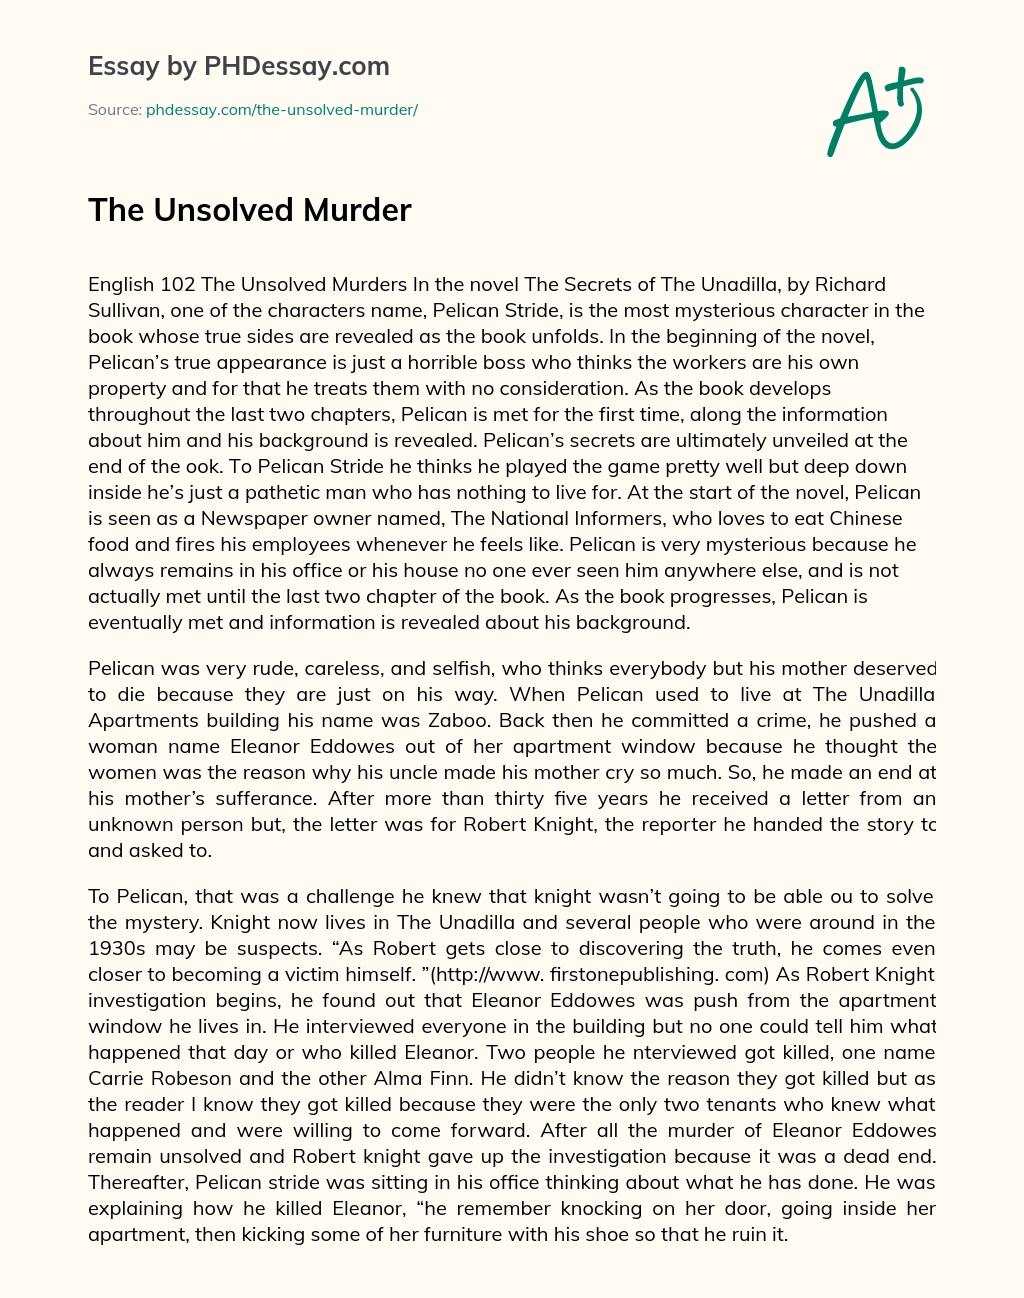 The Unsolved Murder essay